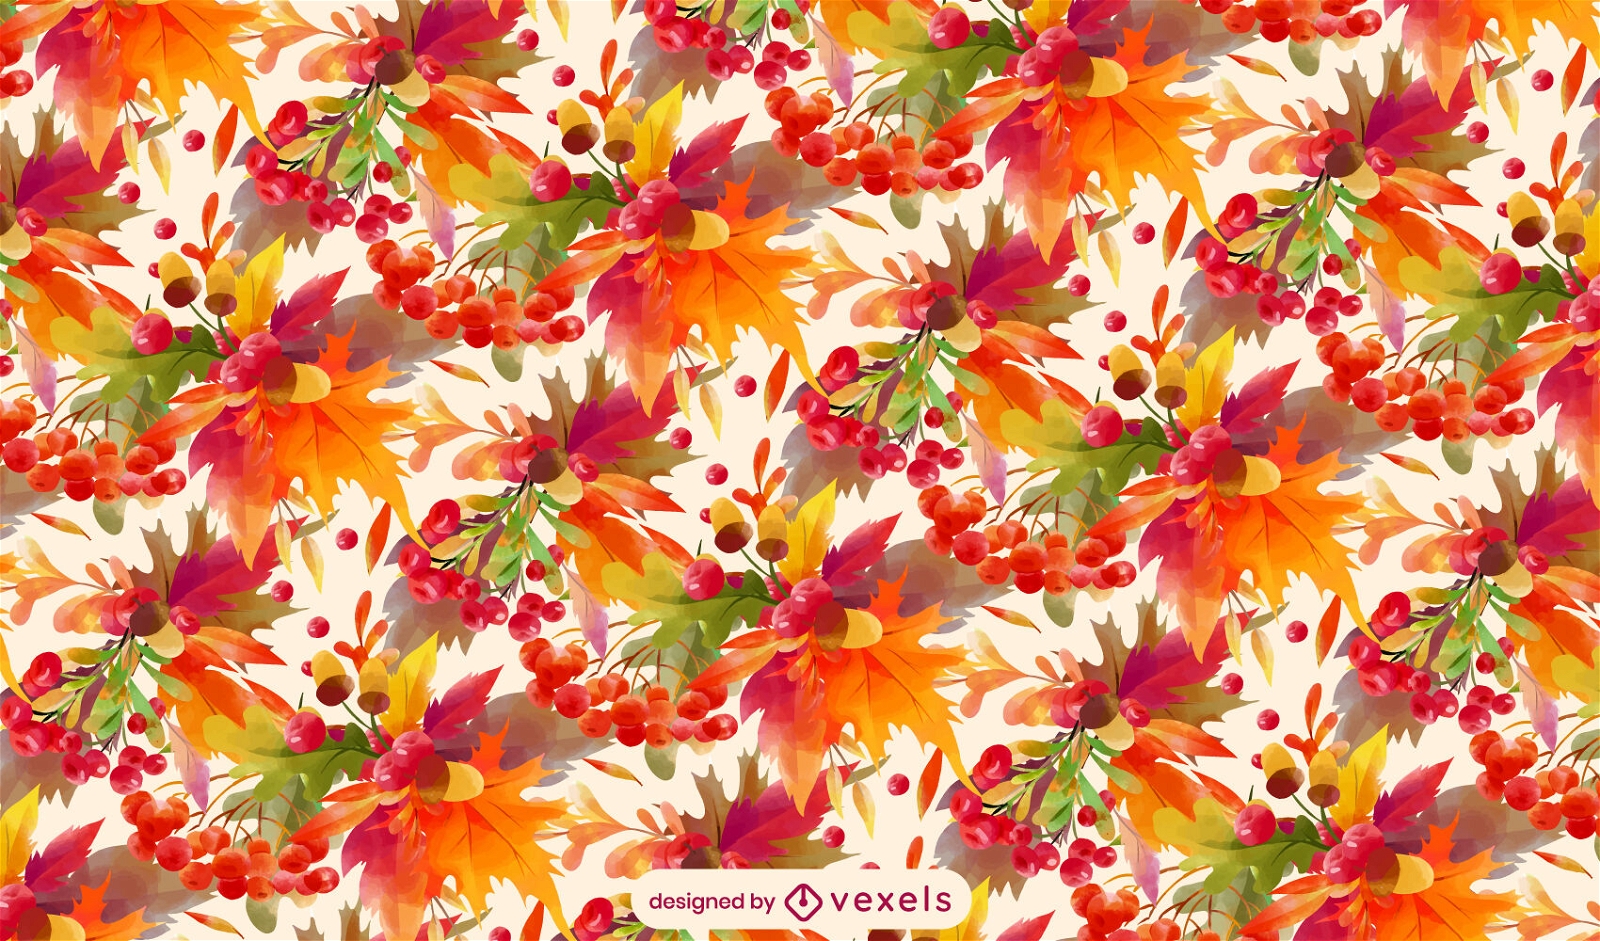 Autumn leaves and flowers pattern design